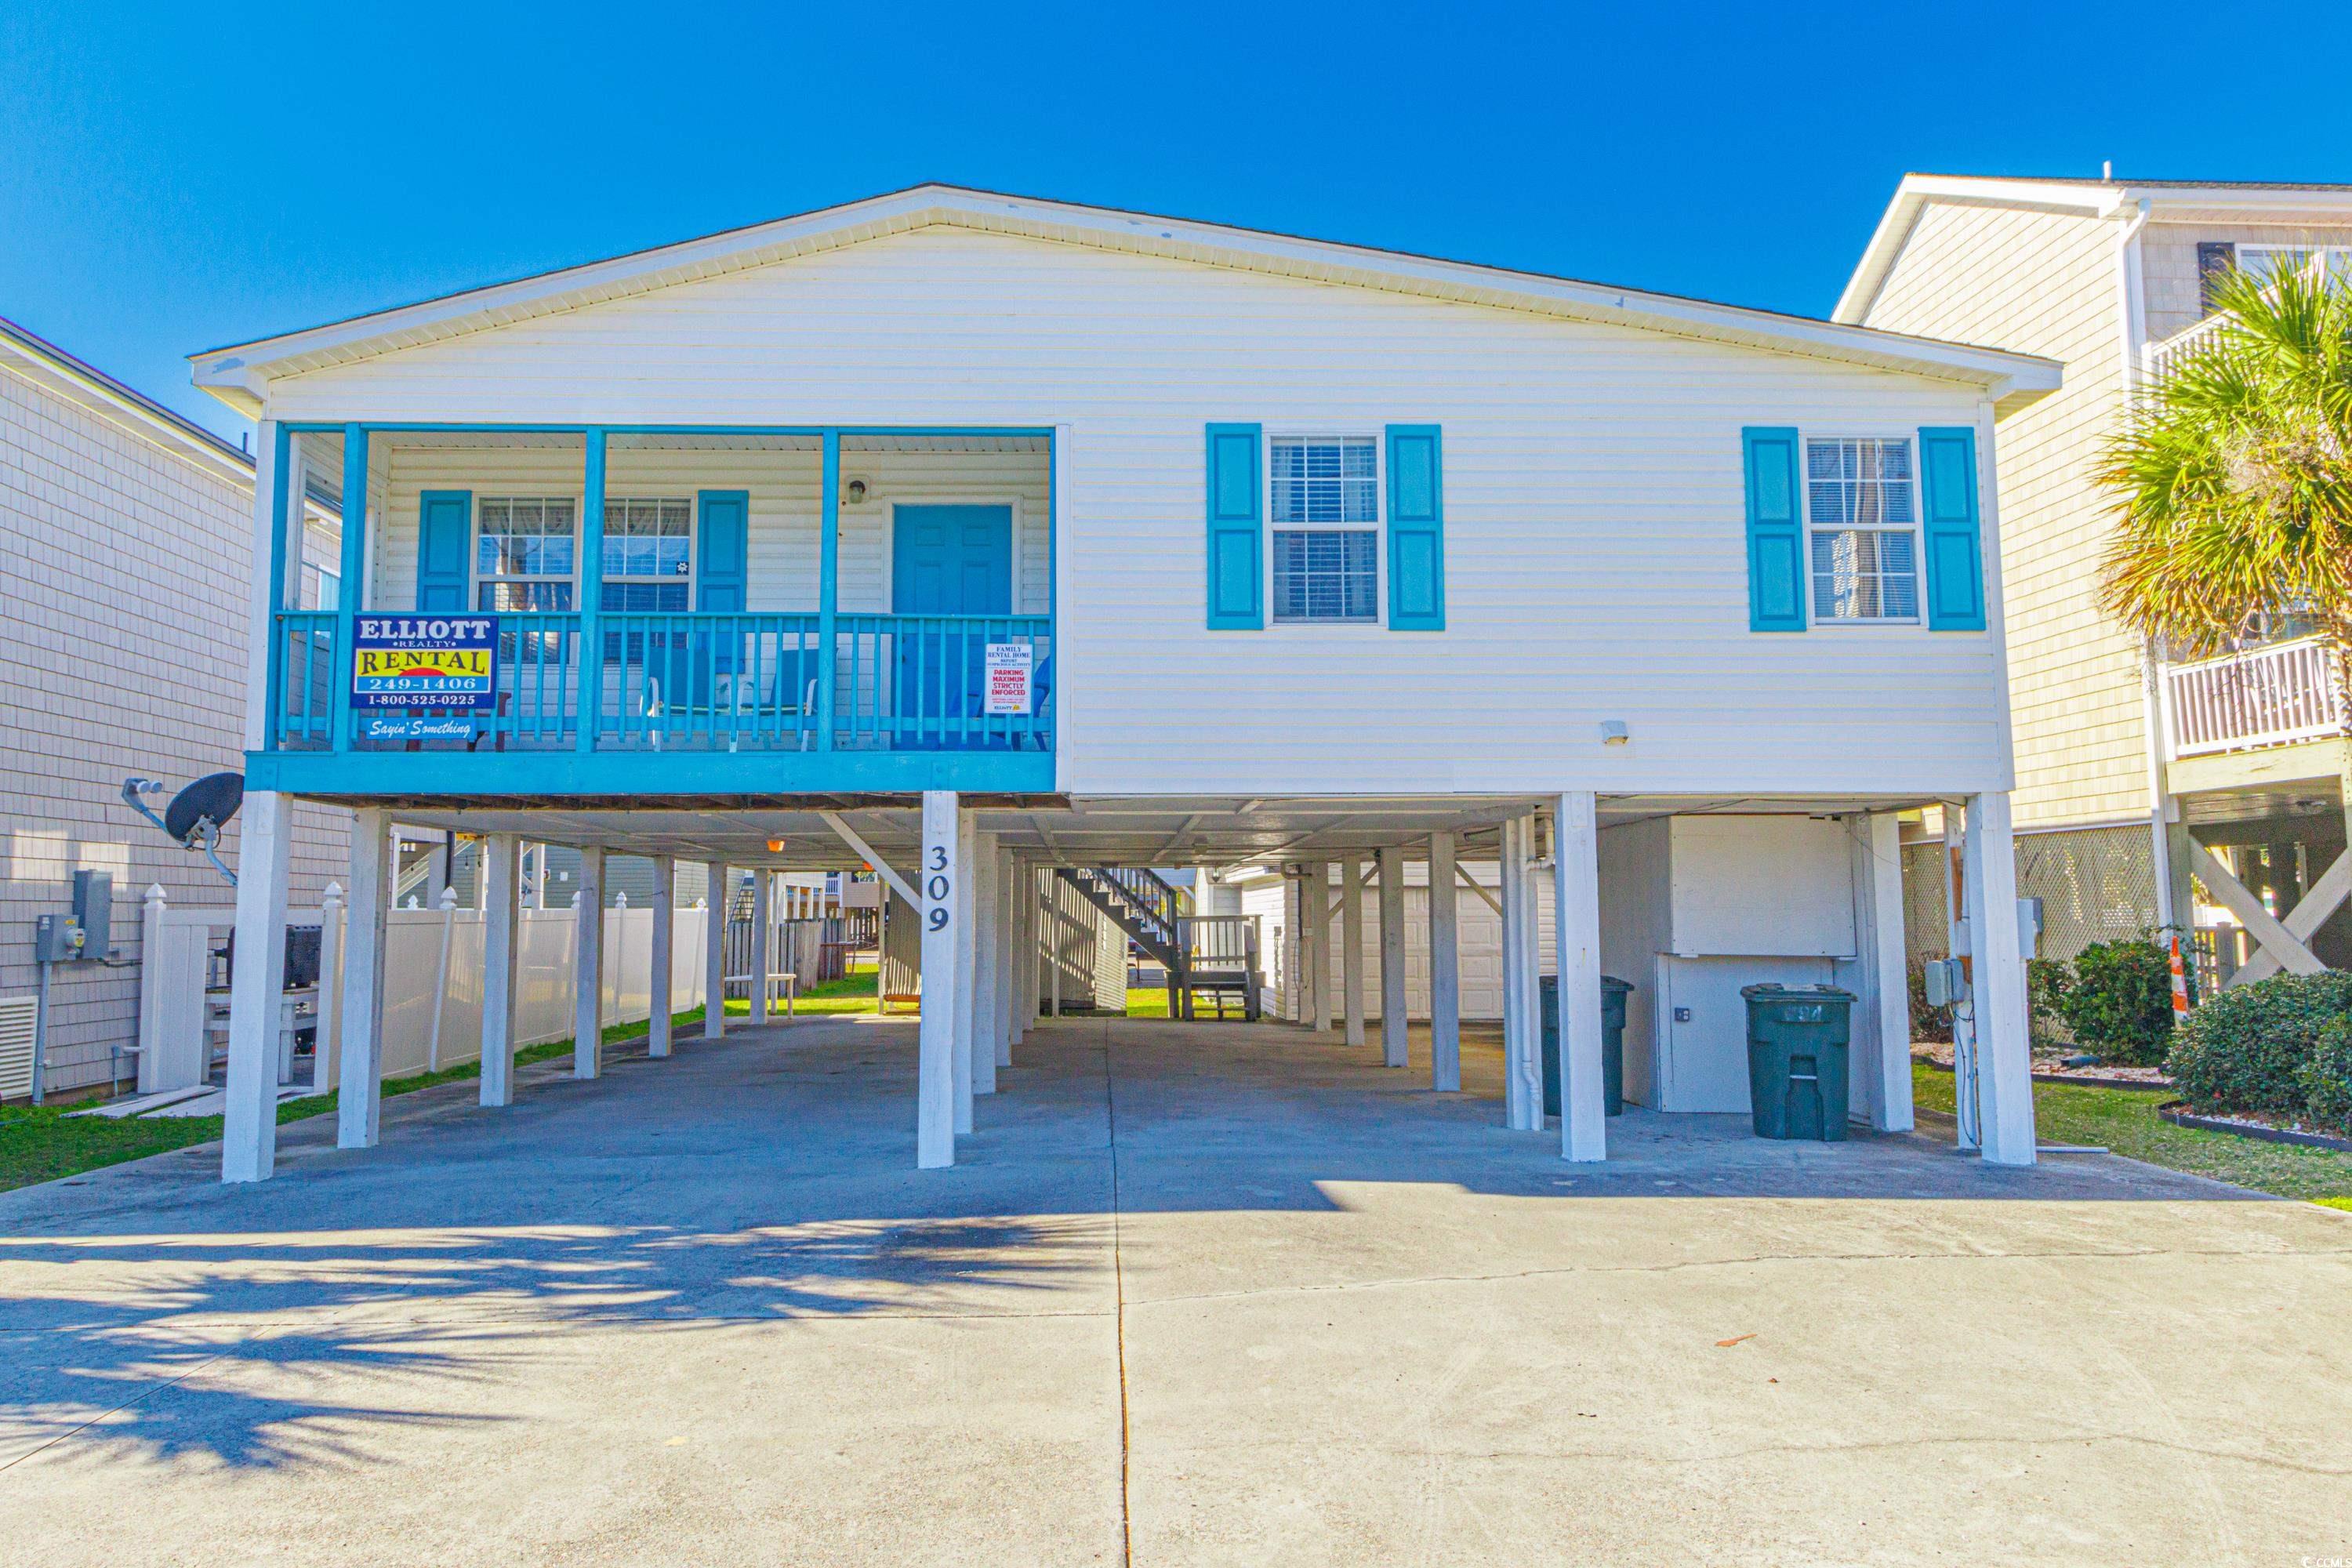 classic raised beach home with a great location in cherry grove. this 3br/2.5ba home is a super short walk to the beach, close to the cherry grove fishing pier, walking distance to sea mountain hwy and all the attractions, restaurants, and beach shopping you need. this home has plenty of storage, laundry room/mud room. kitchen and breakfast area and outdoor storage. also a unique feature with a private elevator and a brand new roof in 2023, hvac is 3yrs+/- old. front and back decks provide great views of cherry grove. cherry grove is a family destination for years. there is so much to do in this area, golfing, fishing, boating, kayaking, paddle boarding, seafood/steak restaurants and great shopping at the coastal north town center. make this your vacation destination and investment property just in time for the peak season revenue.